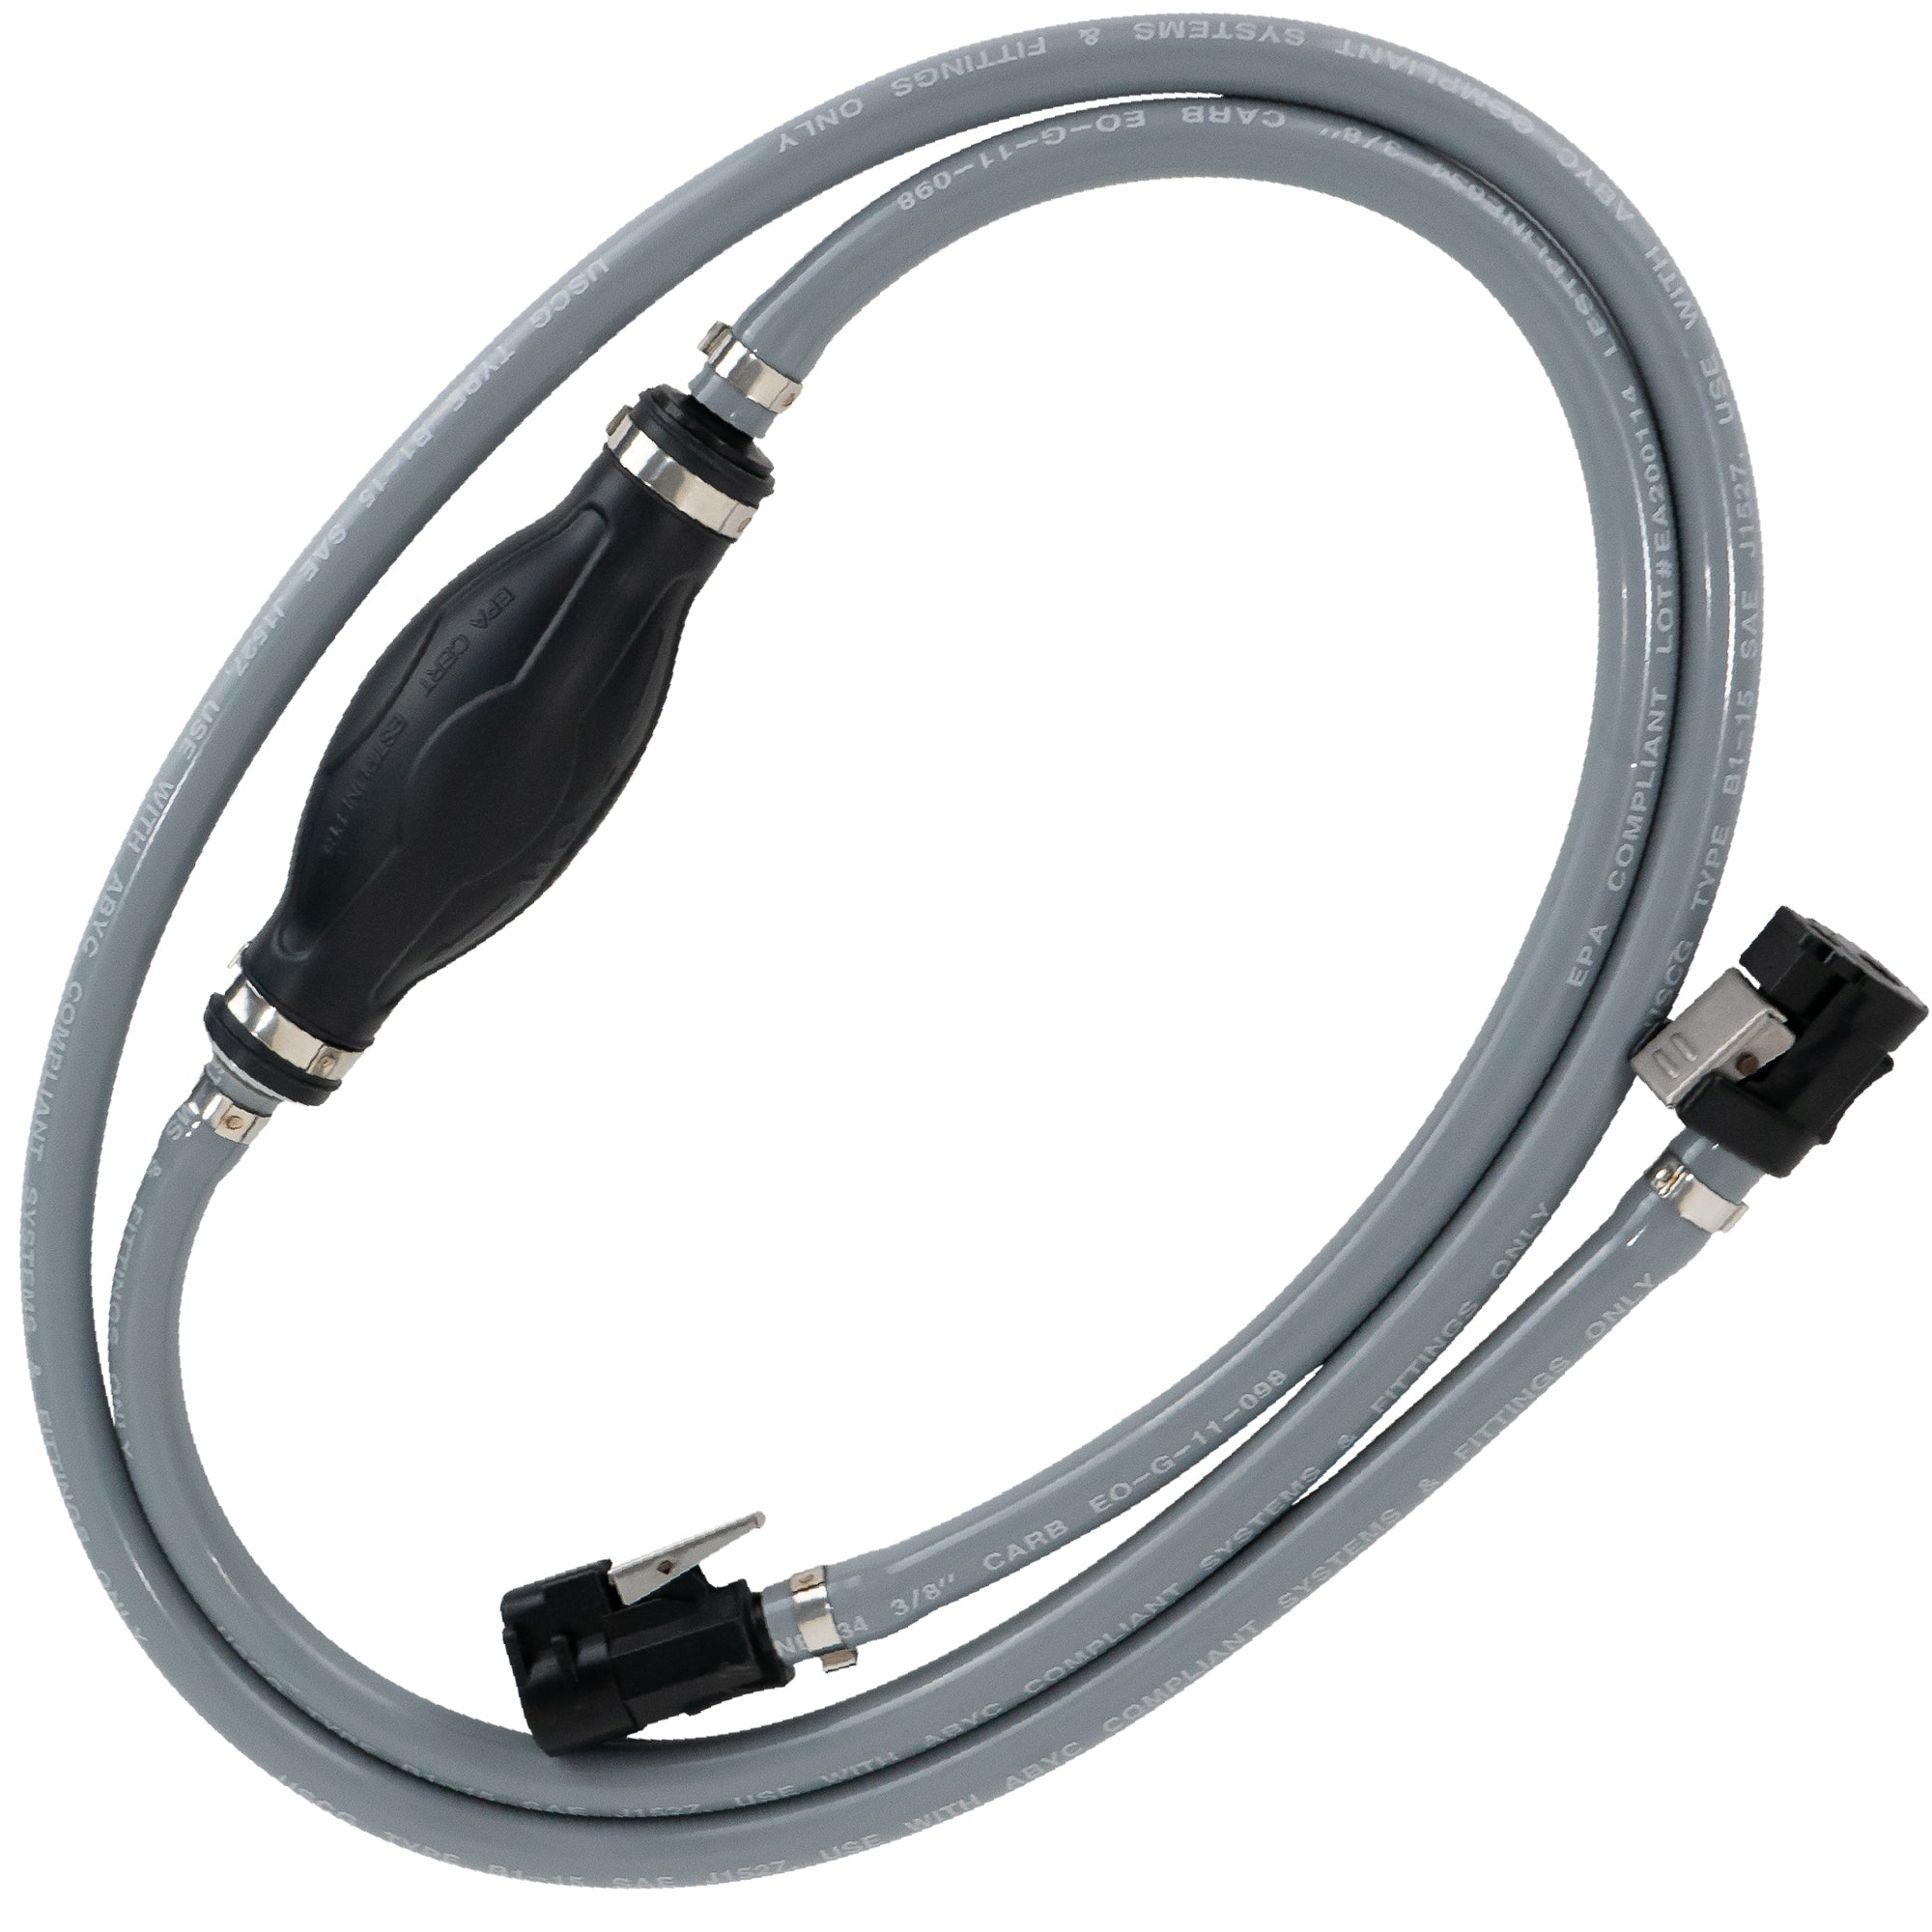 3/8" Outboard Motor Fuel Line with Primer Bulb for Yamaha/Mercury, 6' Long, EPA/CARB - FO4282